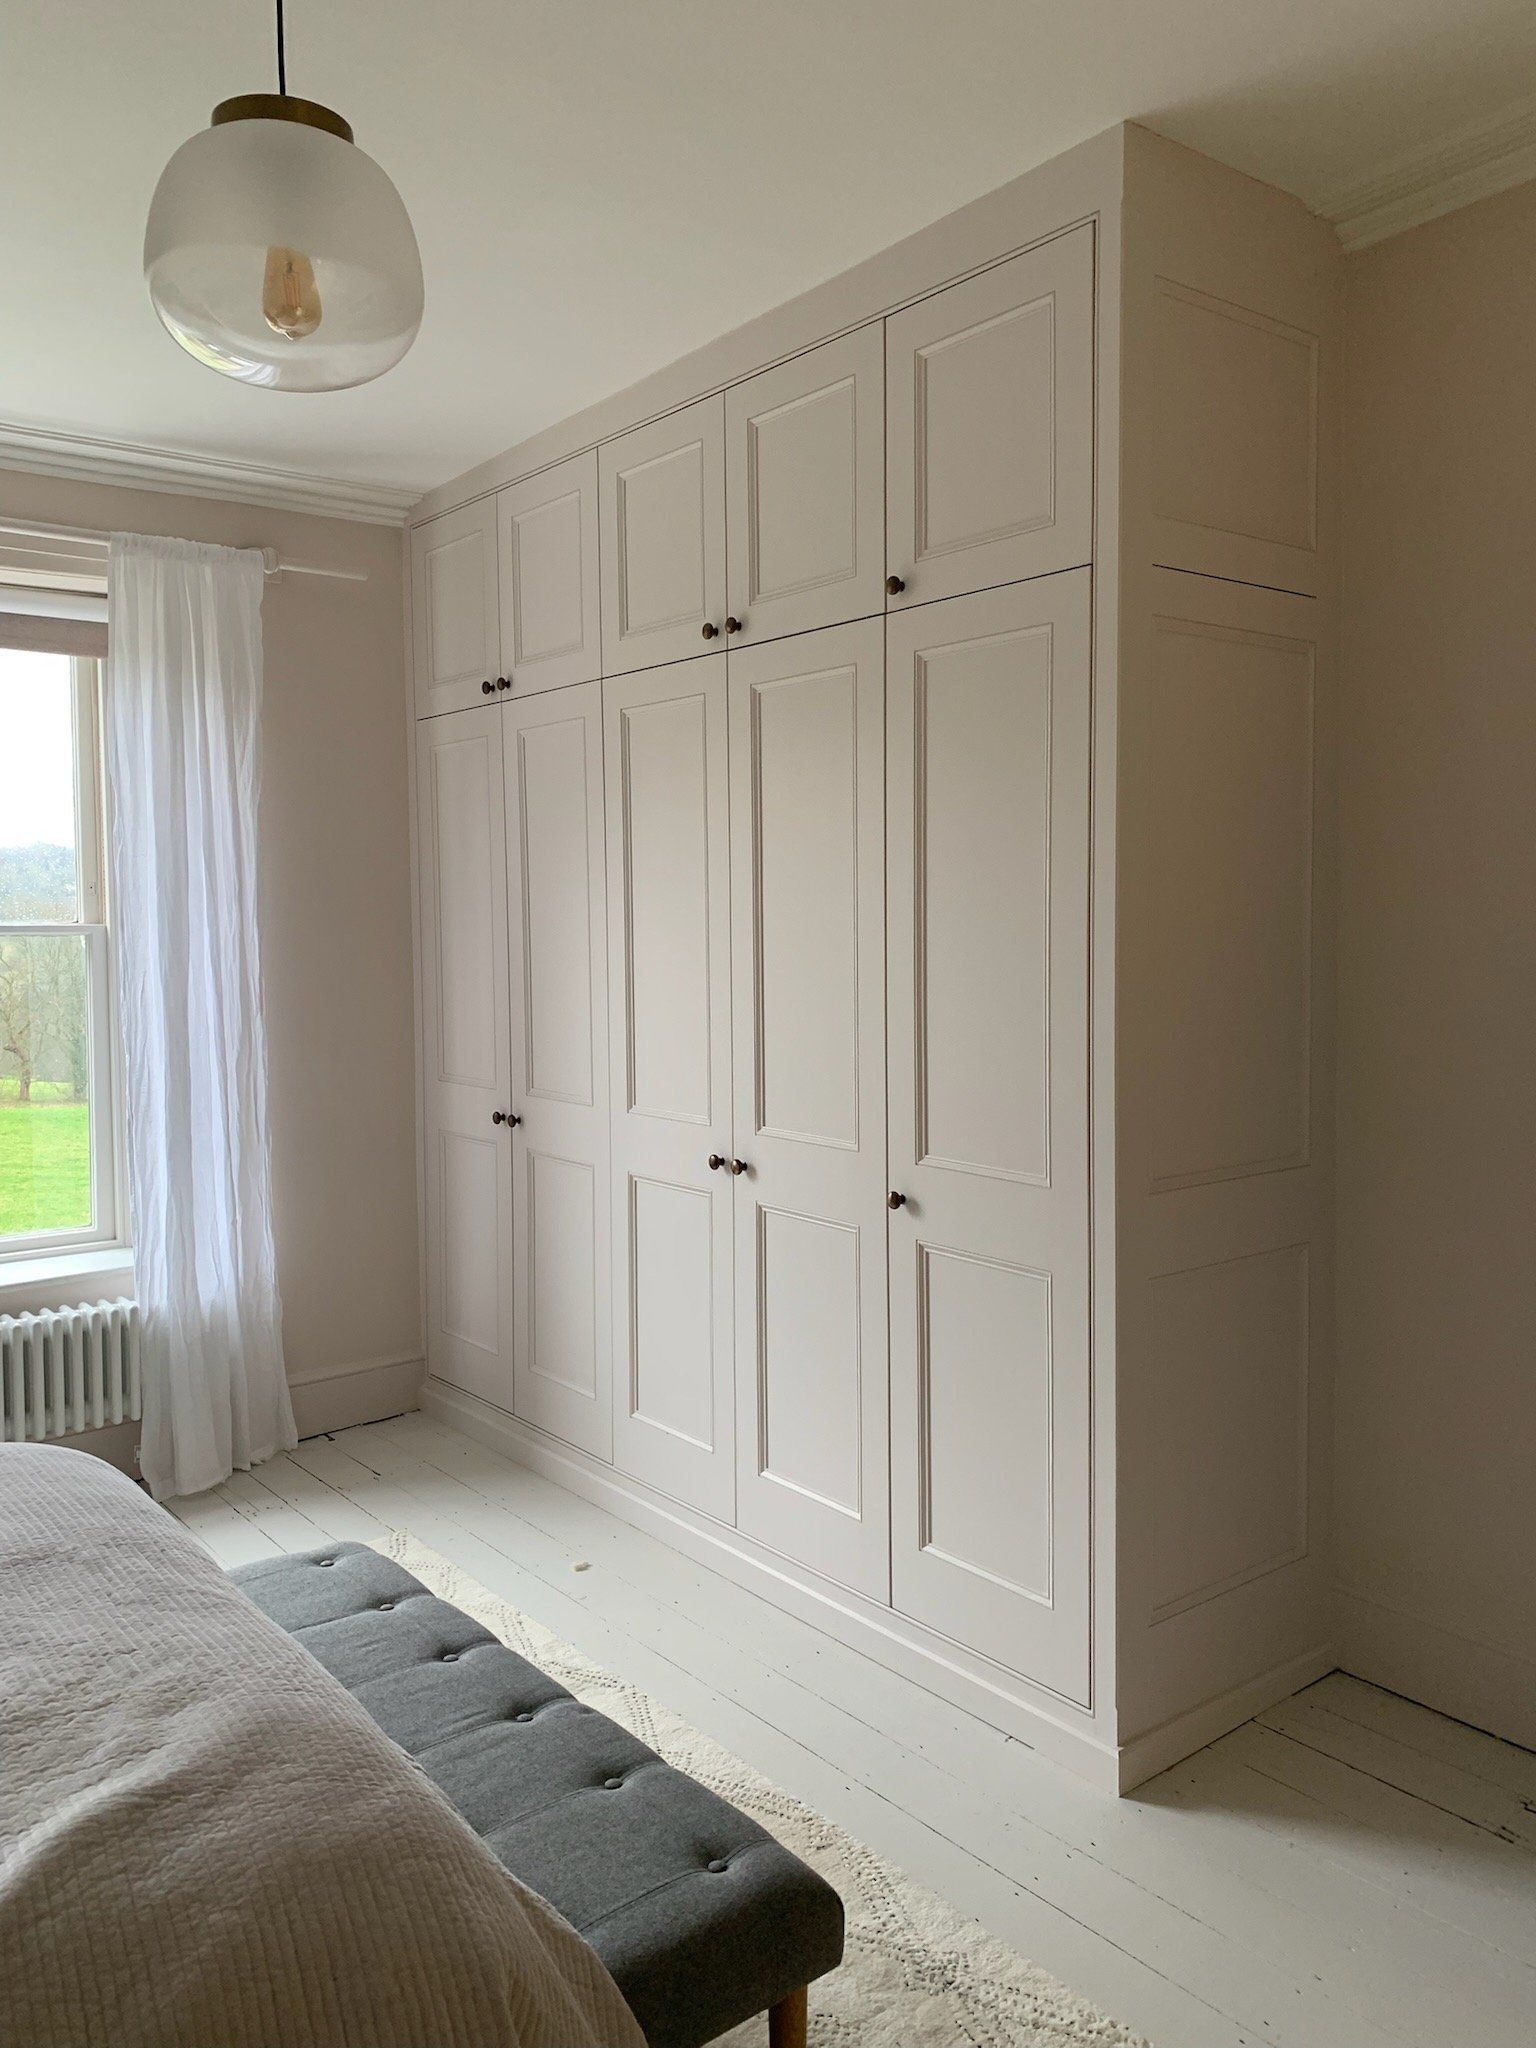 Wardrobes — Oliver Hazael Bespoke Carpentry Intended For Victorian Style Wardrobes (View 15 of 15)